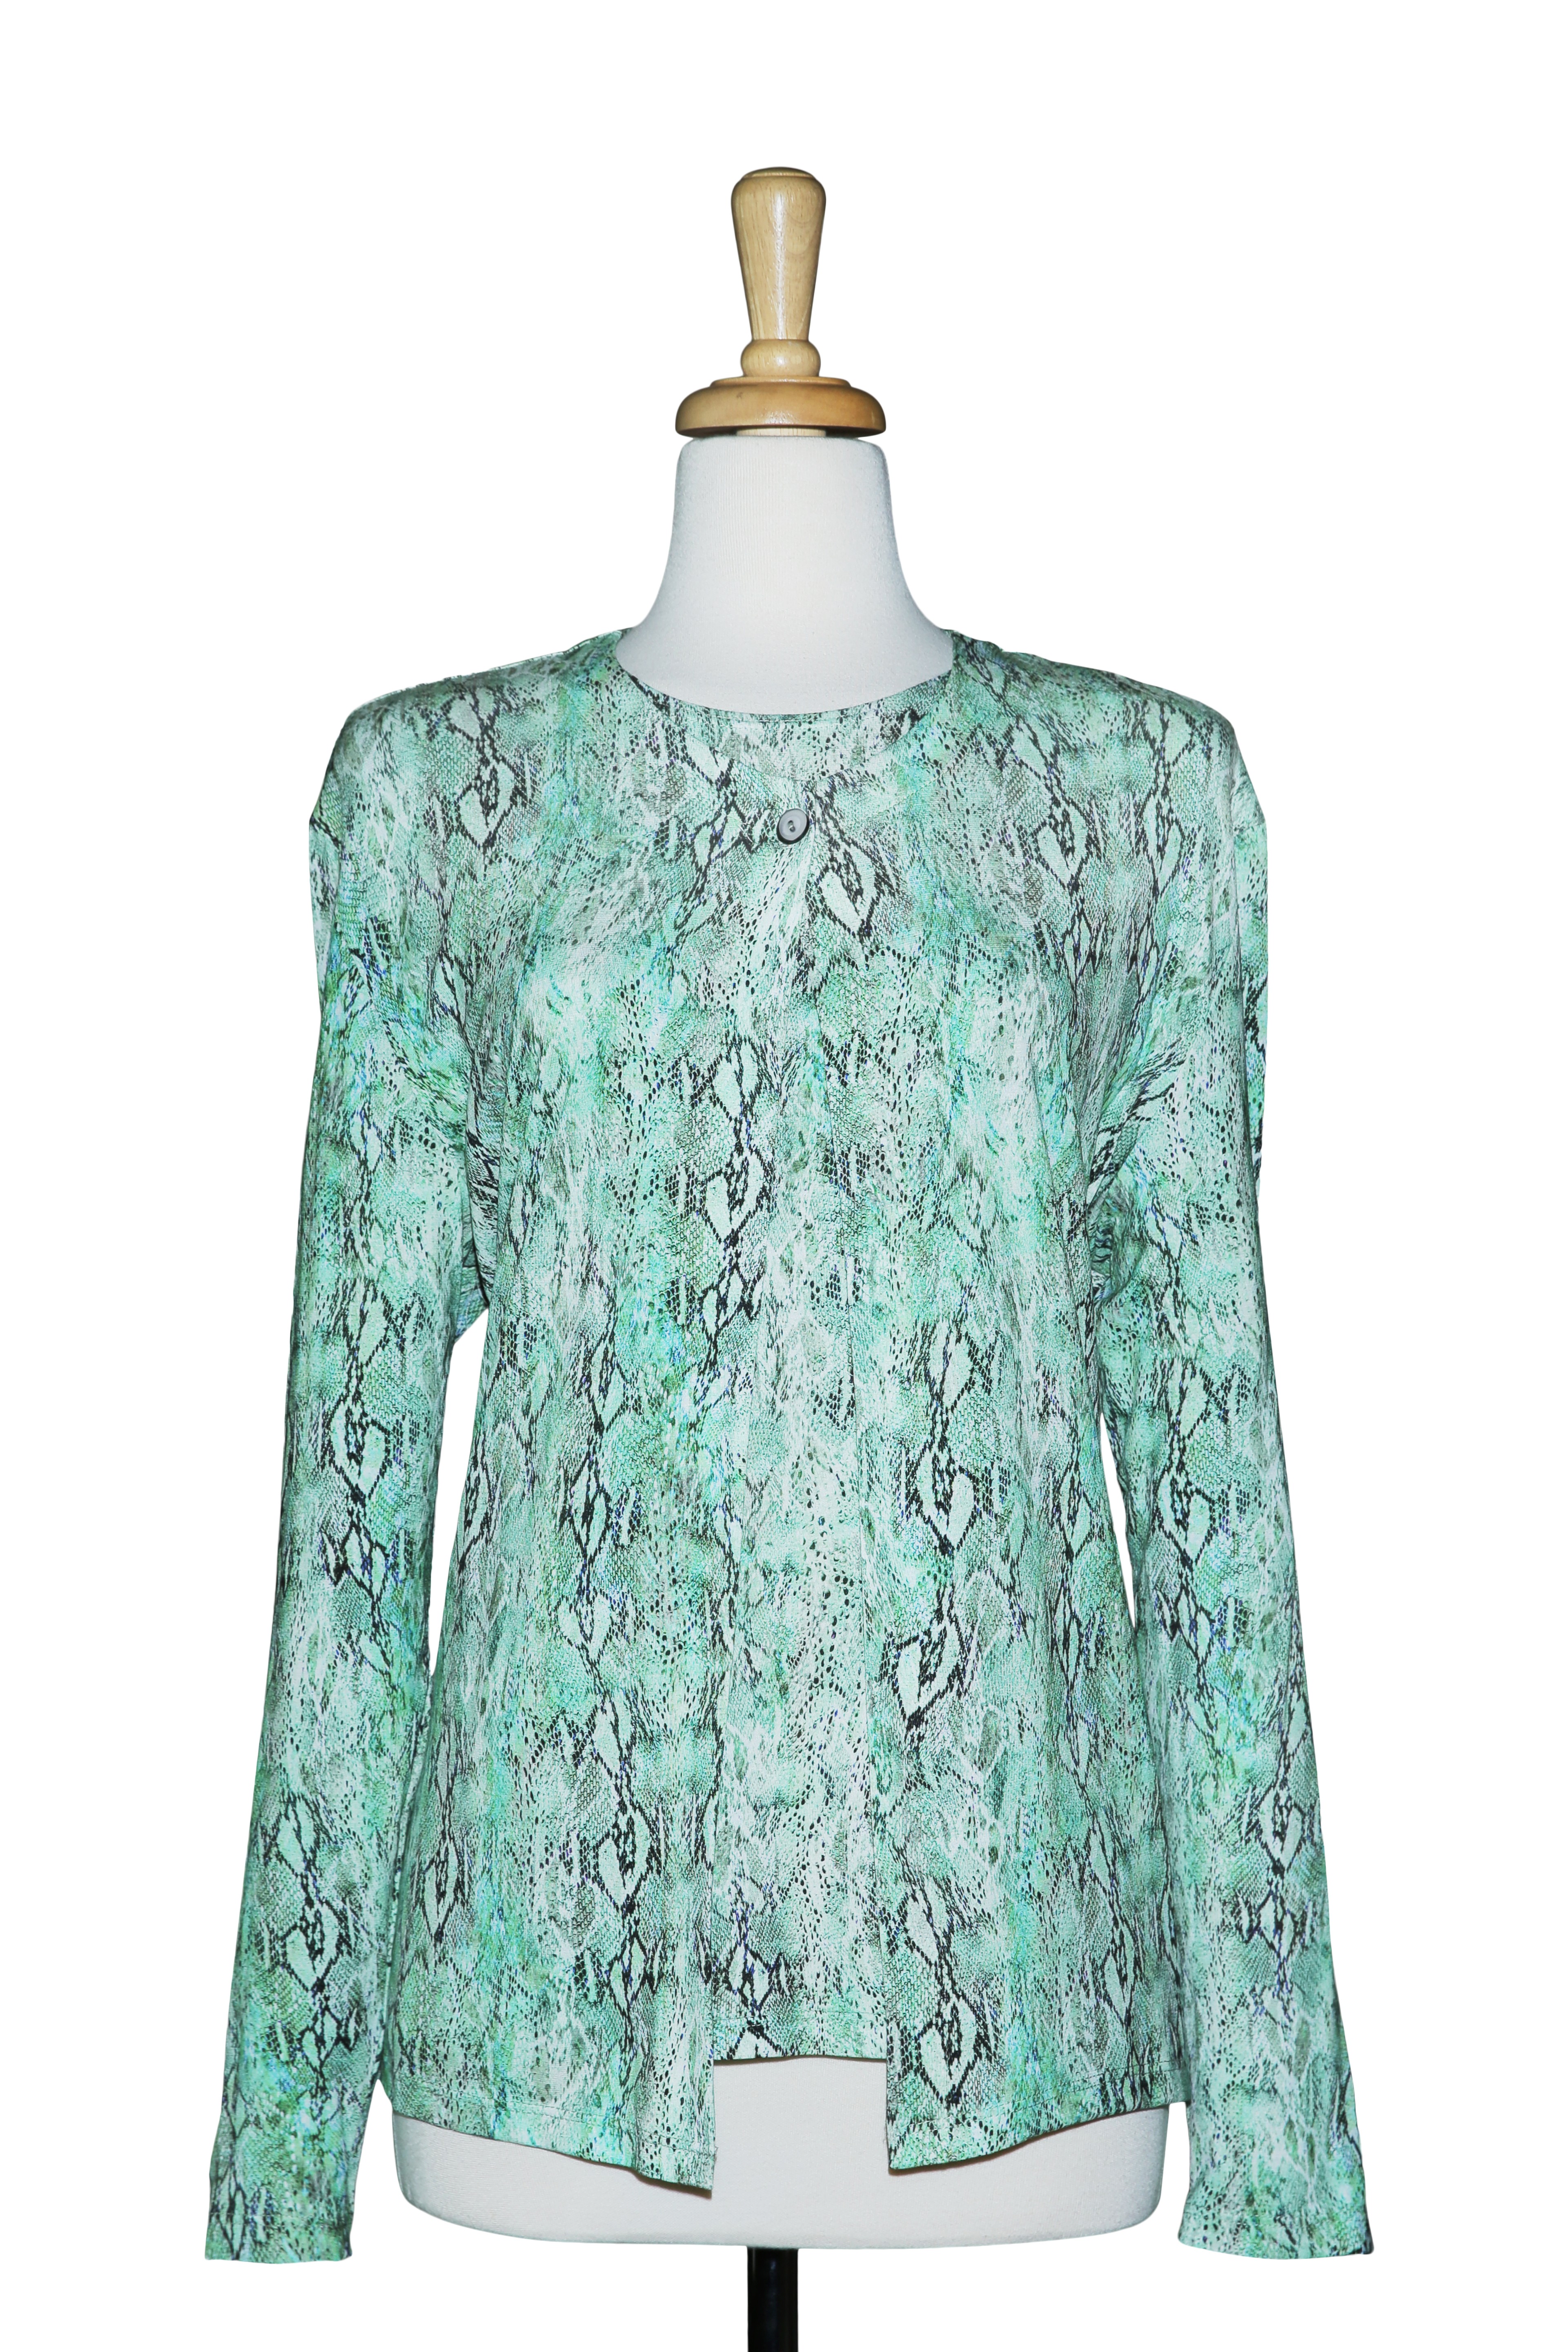 Plus Size Two Piece Mint Green And Black Snakeskin Cotton Set